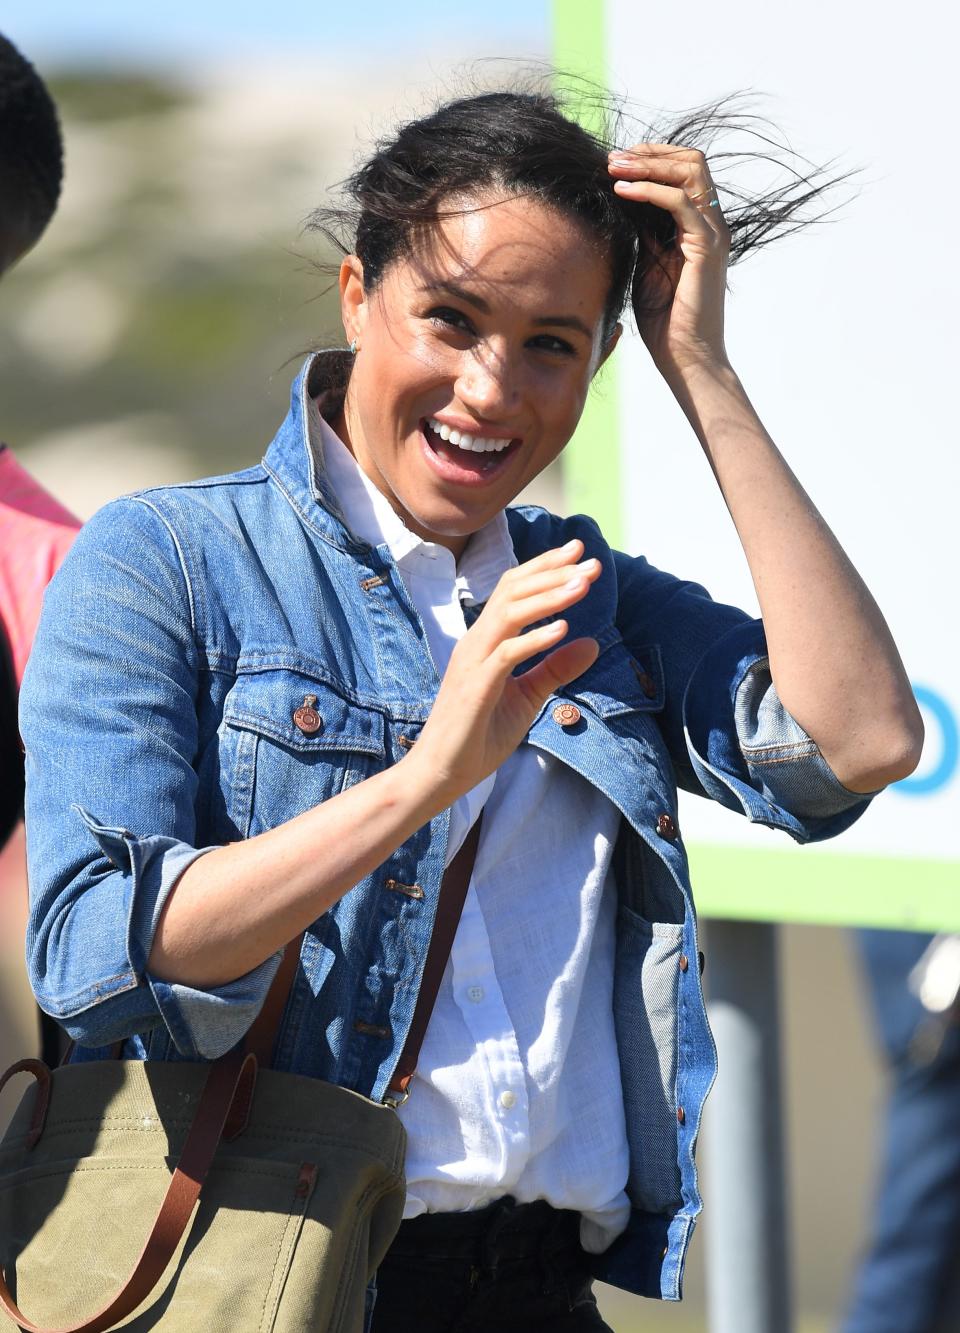 meghan markle in south africa in 2019 wearing a denim jacket and hair blowing in her face